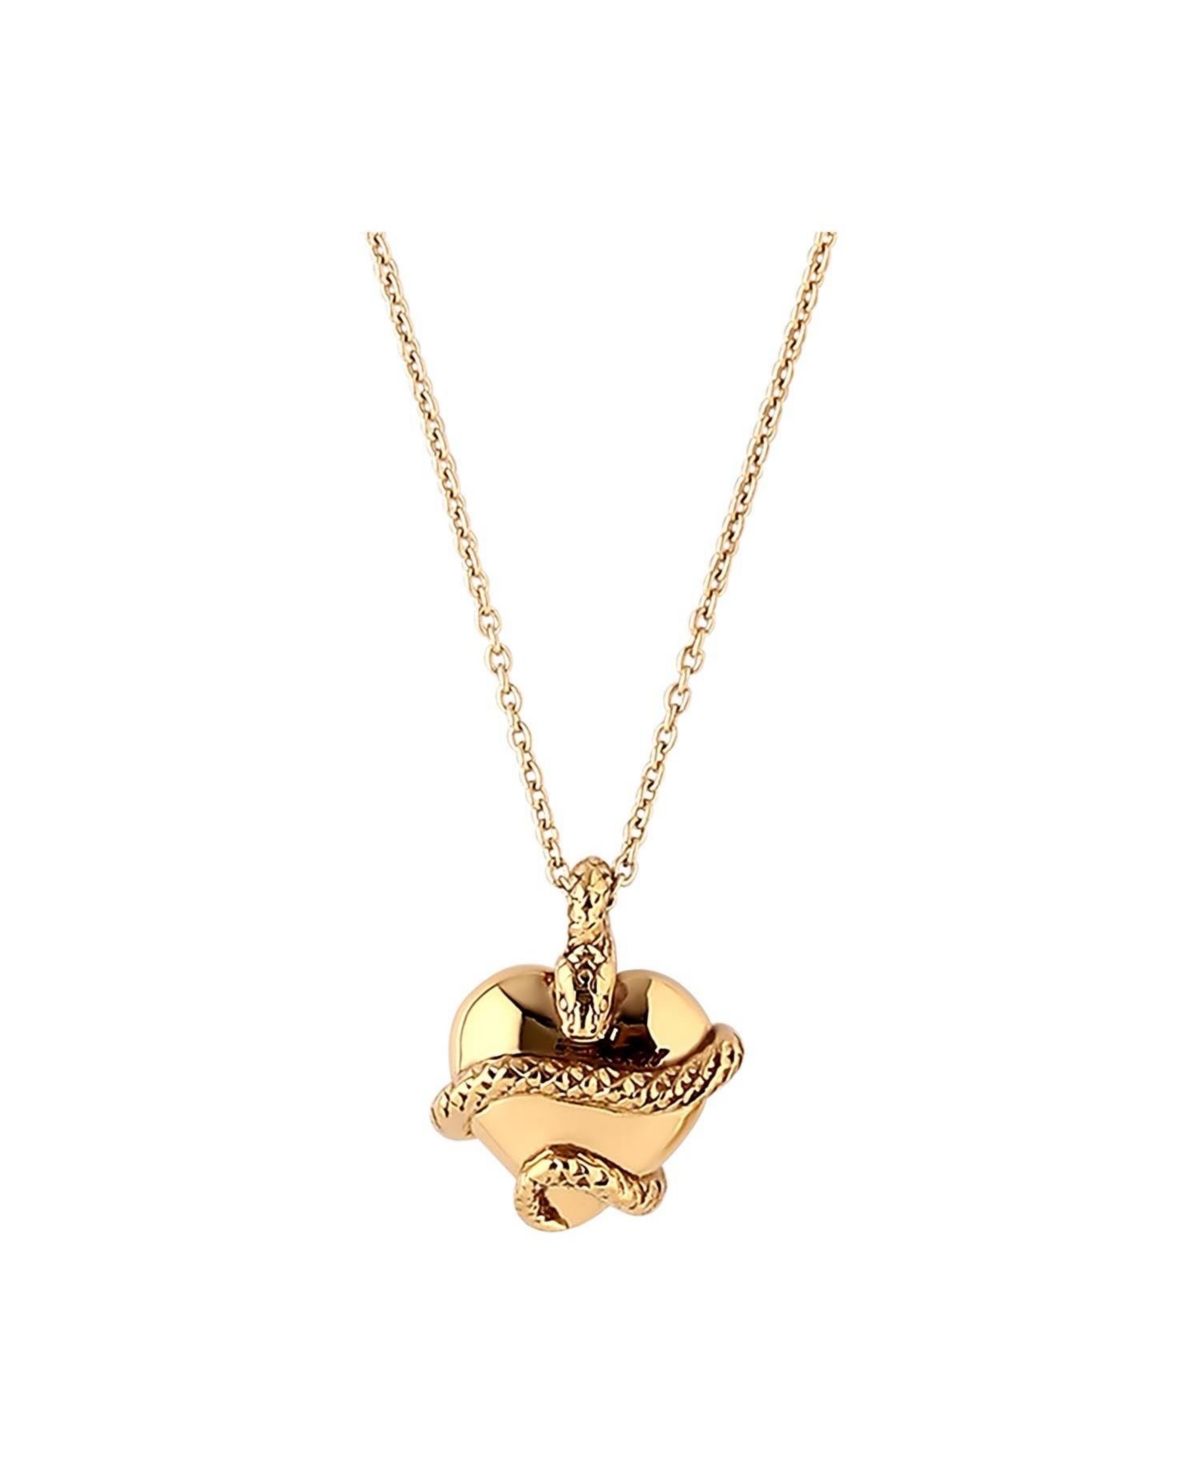 Wise Heart Charm Necklace Gold - Gold